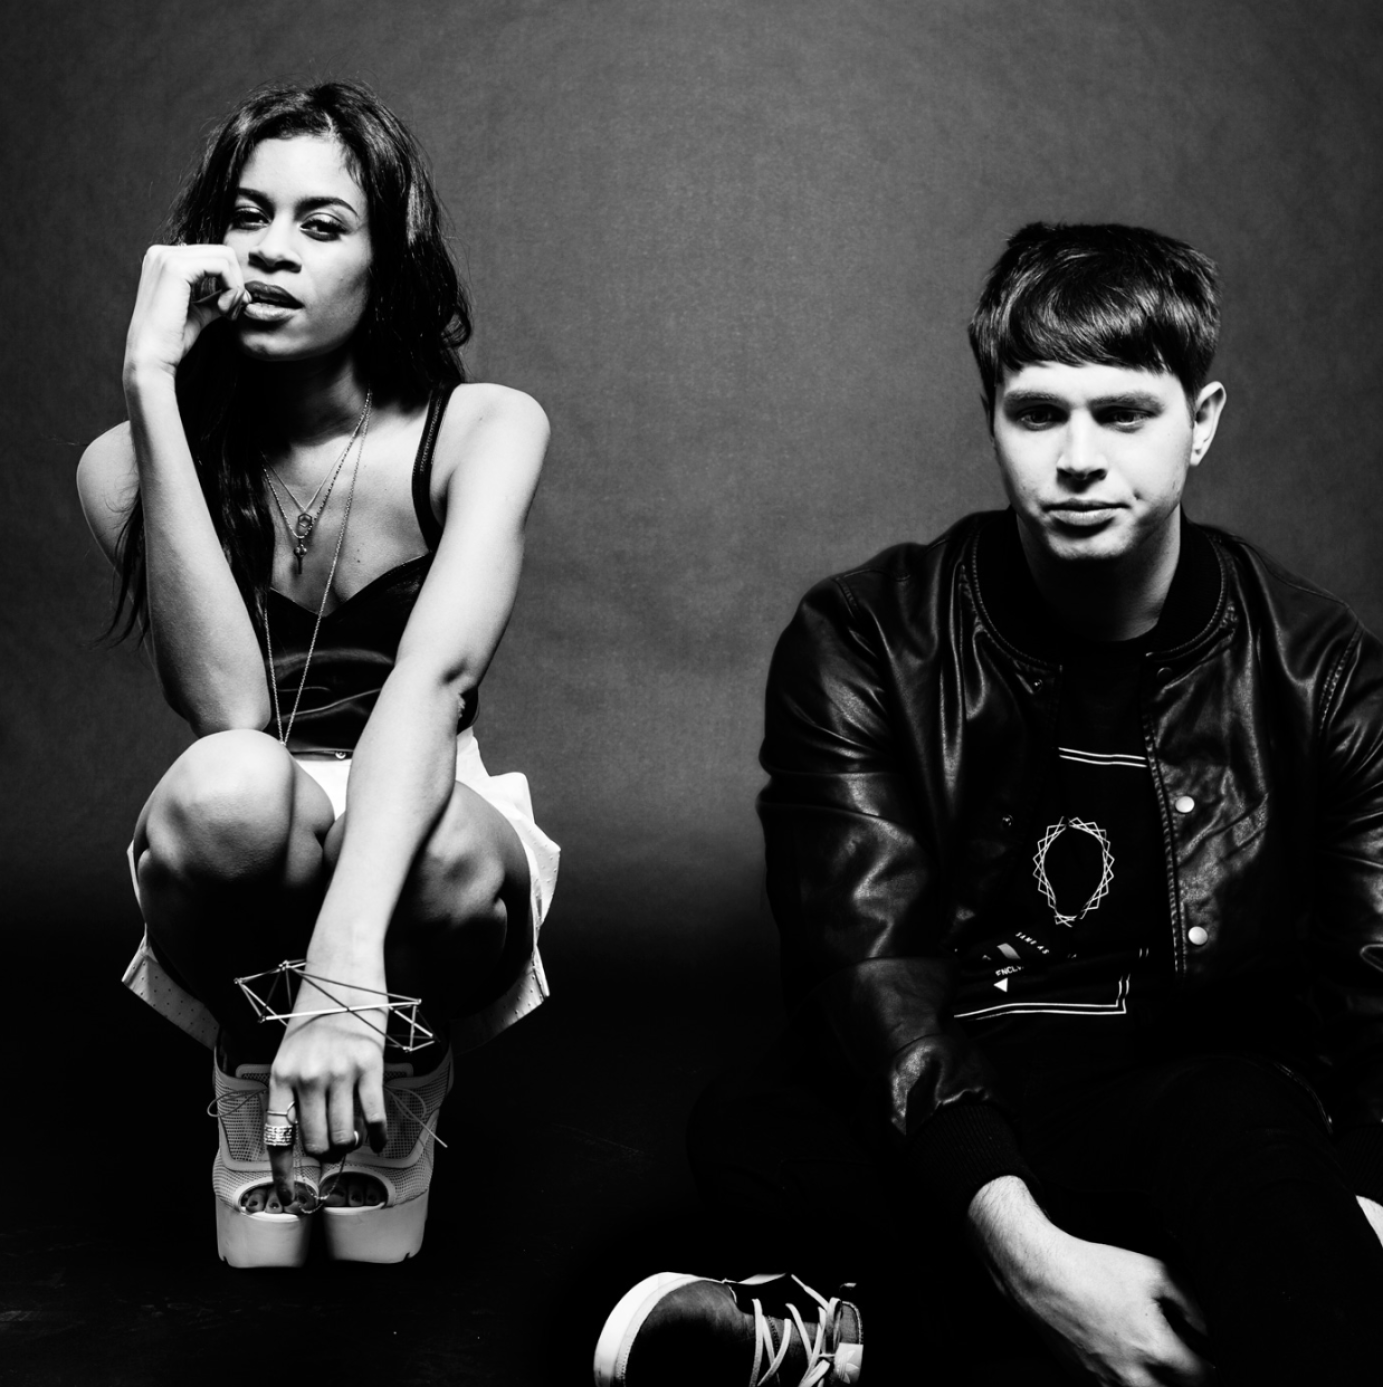 Photography for AlunaGeorge by FionaGarden